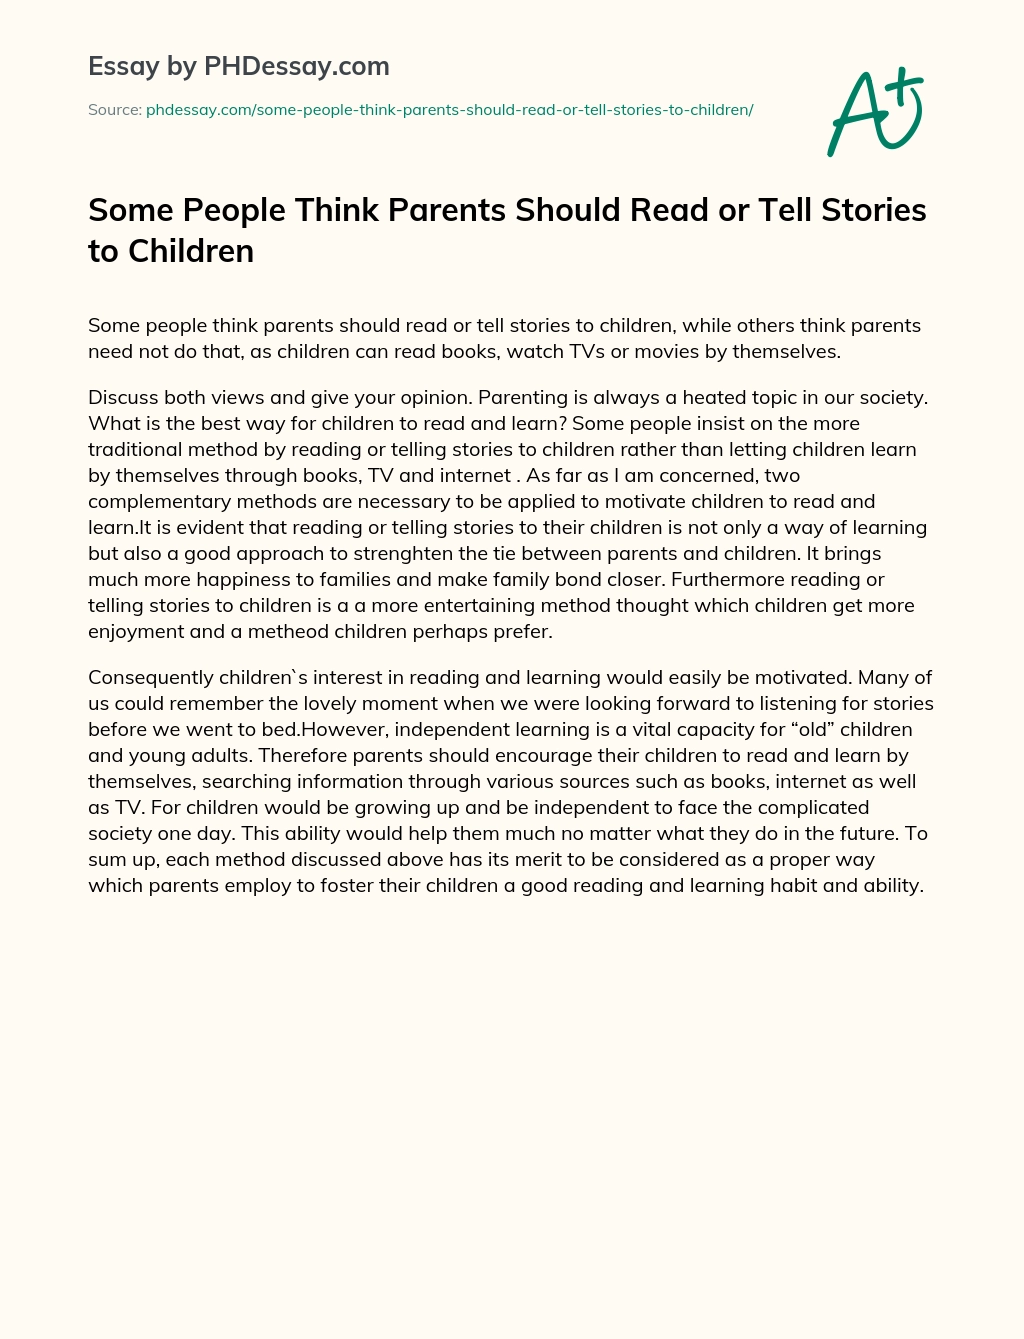 Some People Think Parents Should Read or Tell Stories to Children (300  Words) 